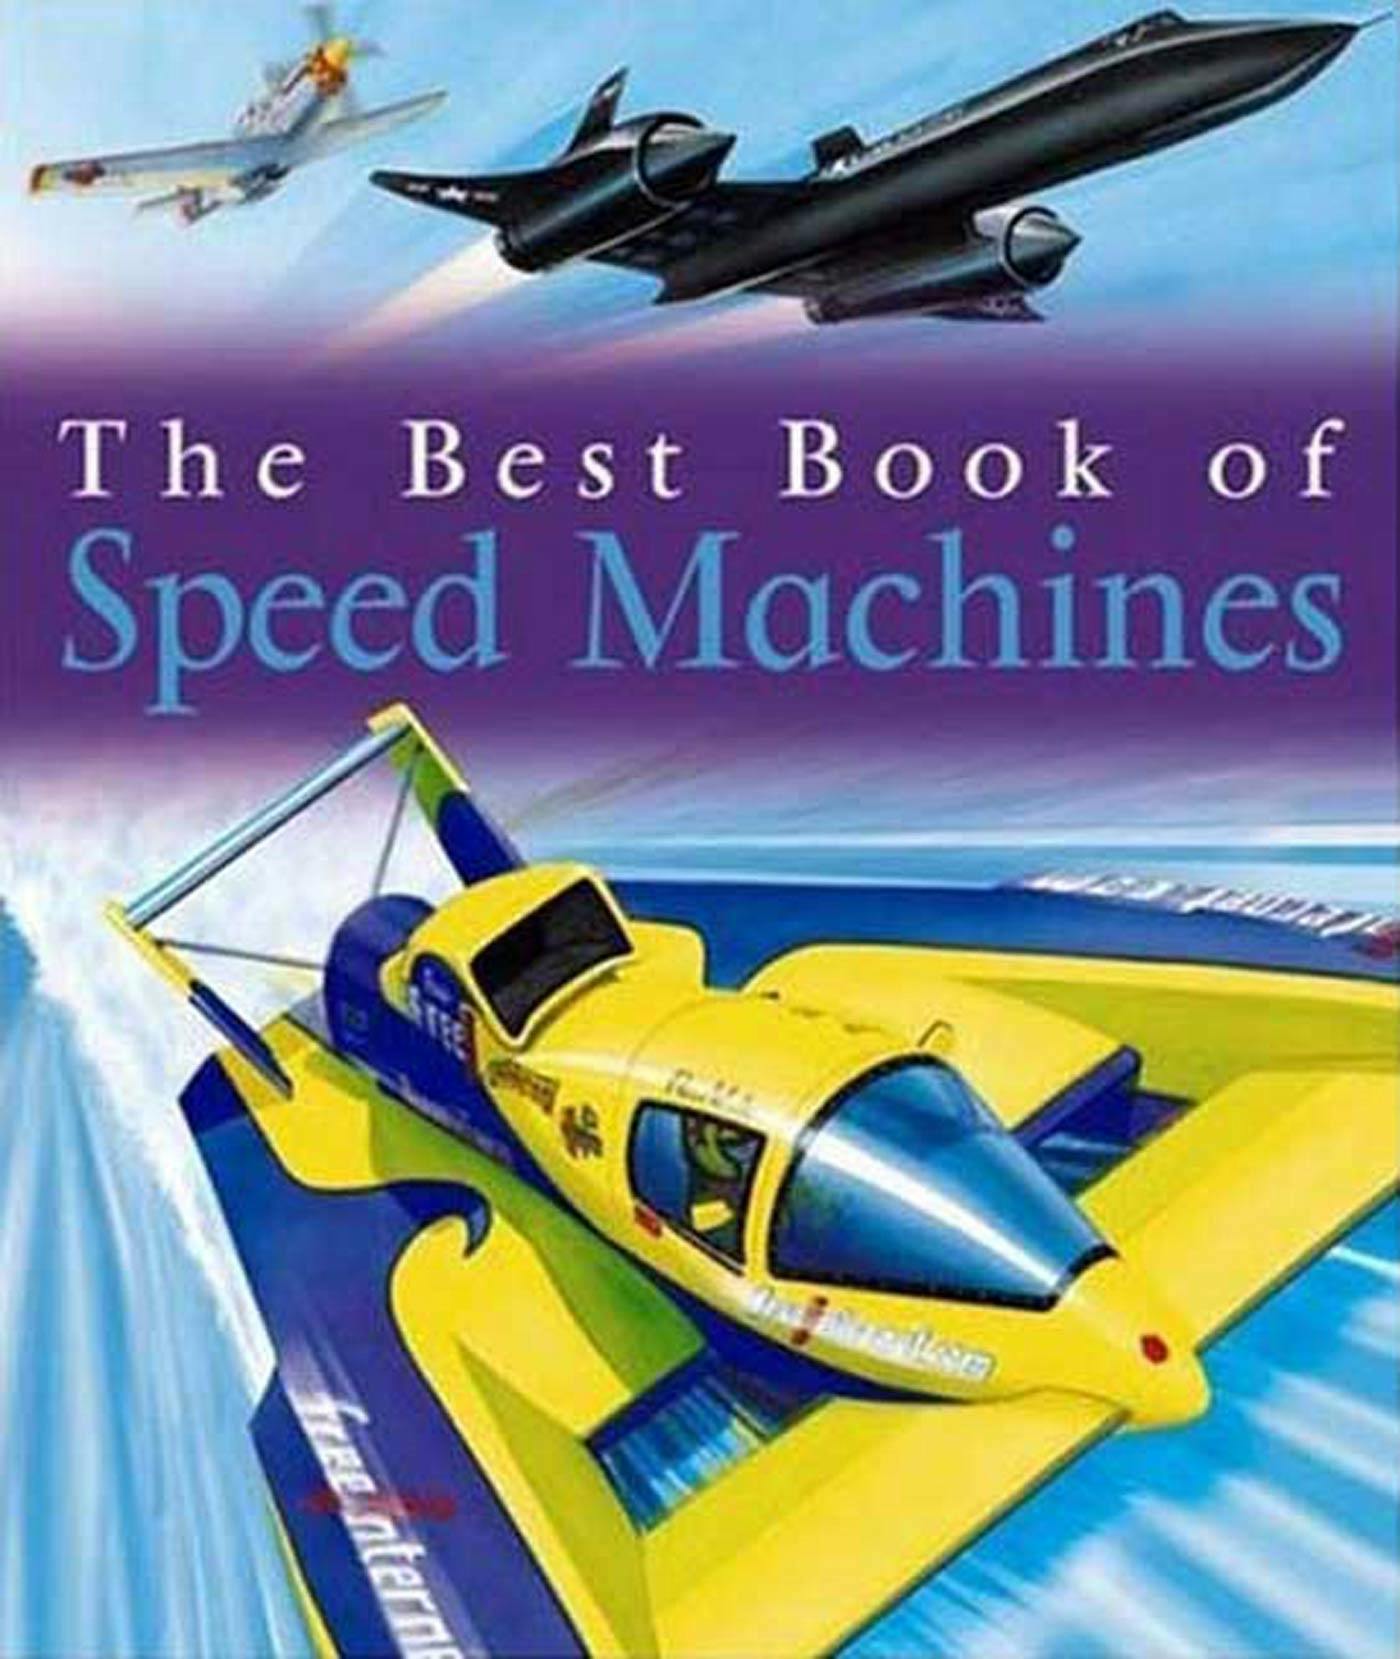 Image of The Best Book of Speed Machines